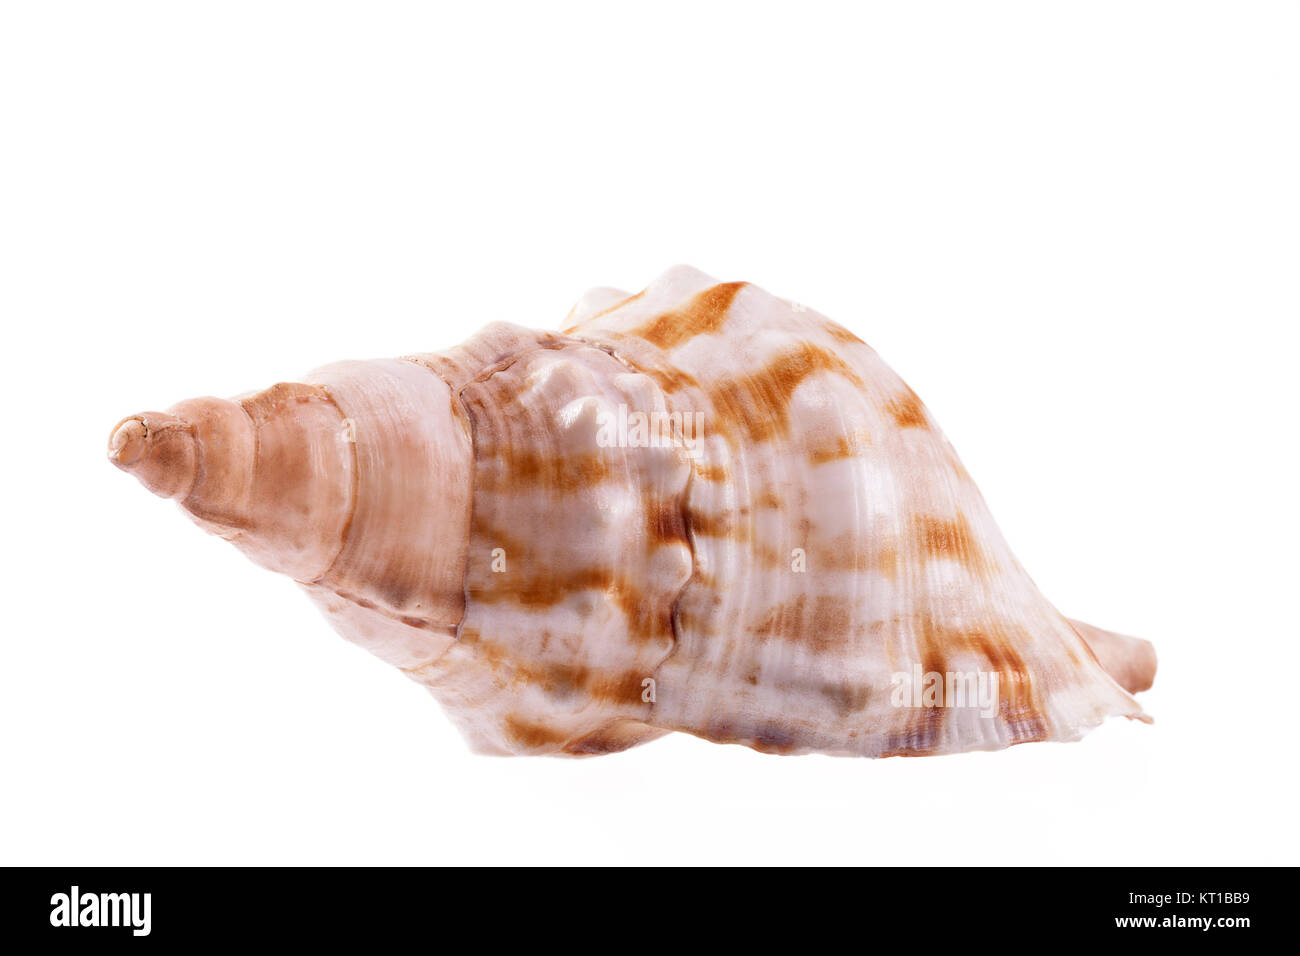 Single sea shell of marine snail, horse conch isolated on white background Stock Photo